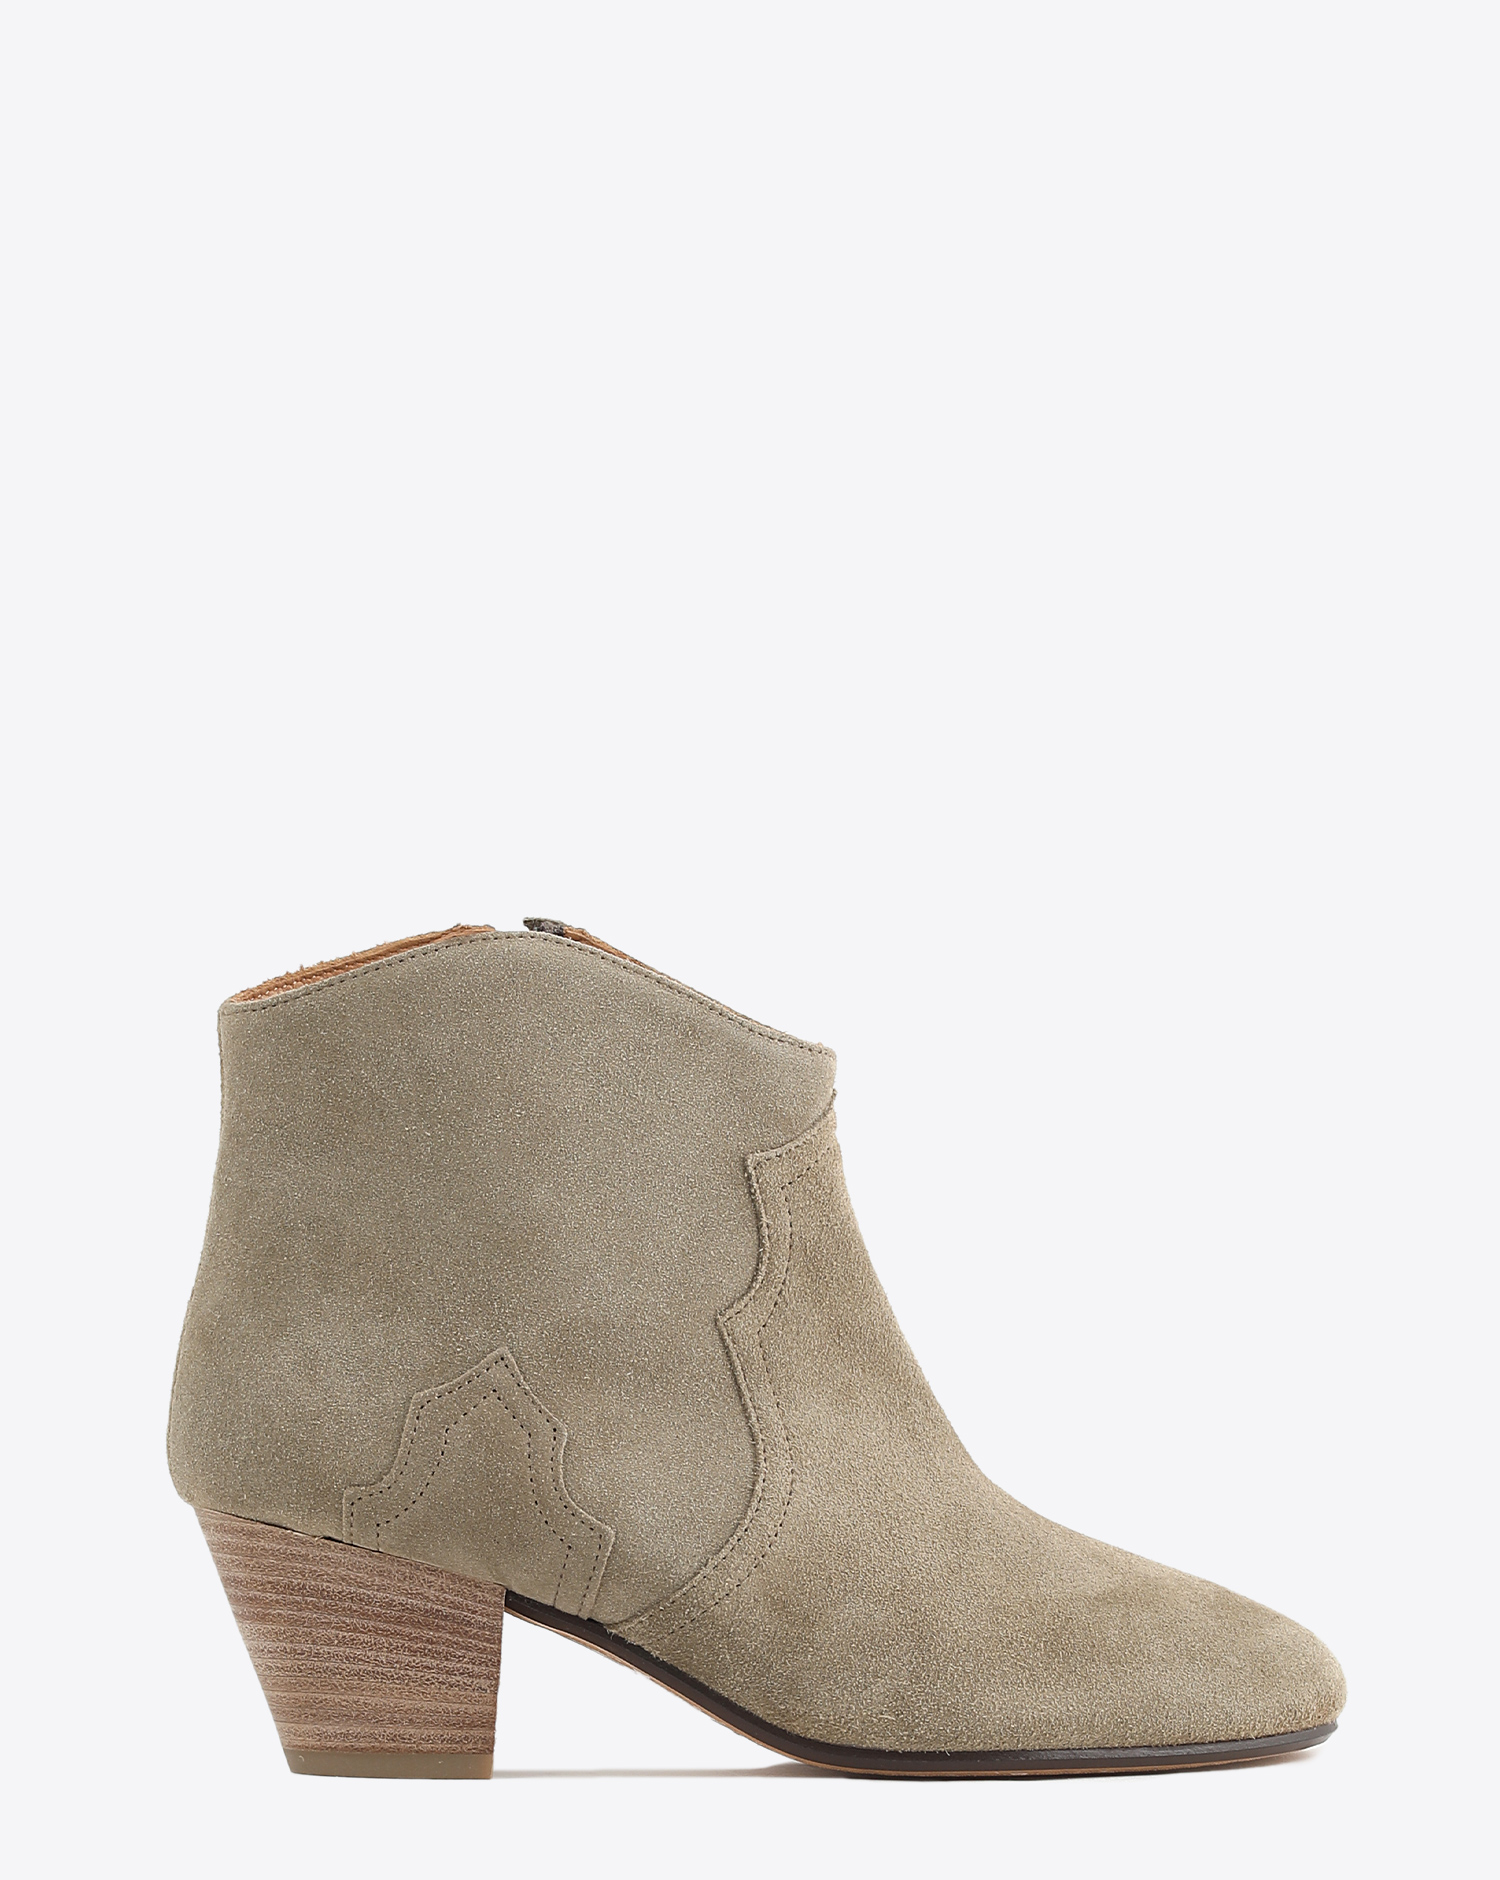 Marant Taupe Isabel – Boots Beige Chaussures Dicker